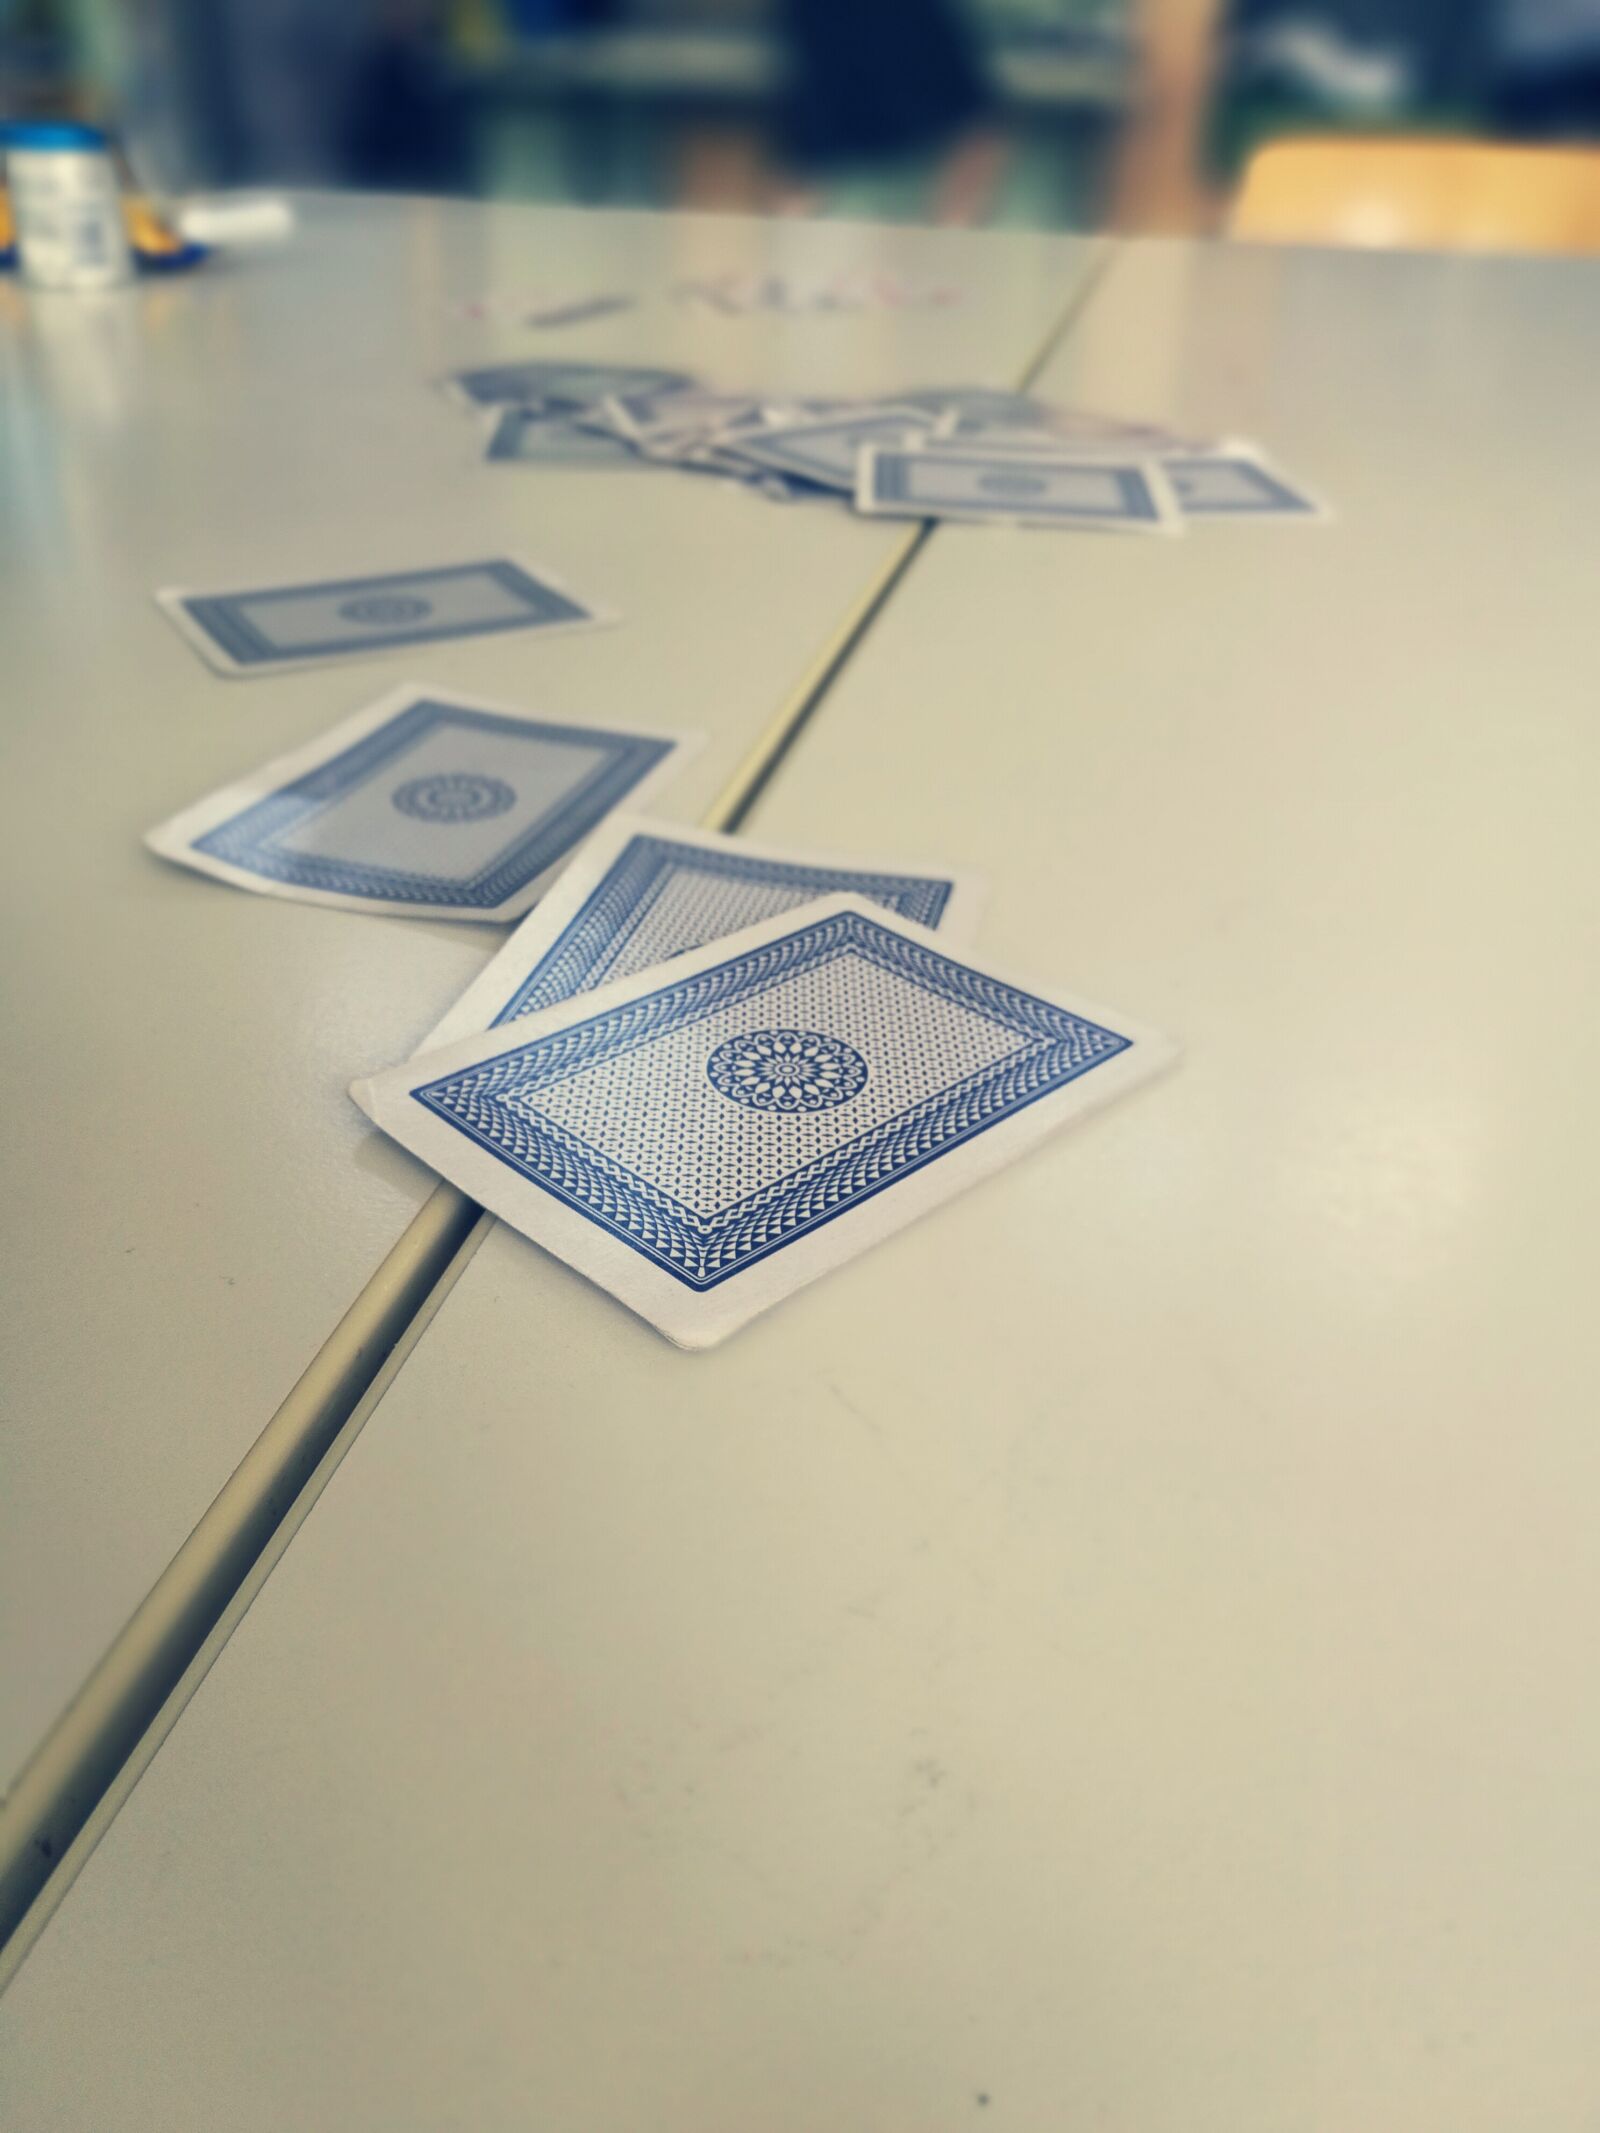 HUAWEI Honor 8 sample photo. Cards, playing, cards, table photography